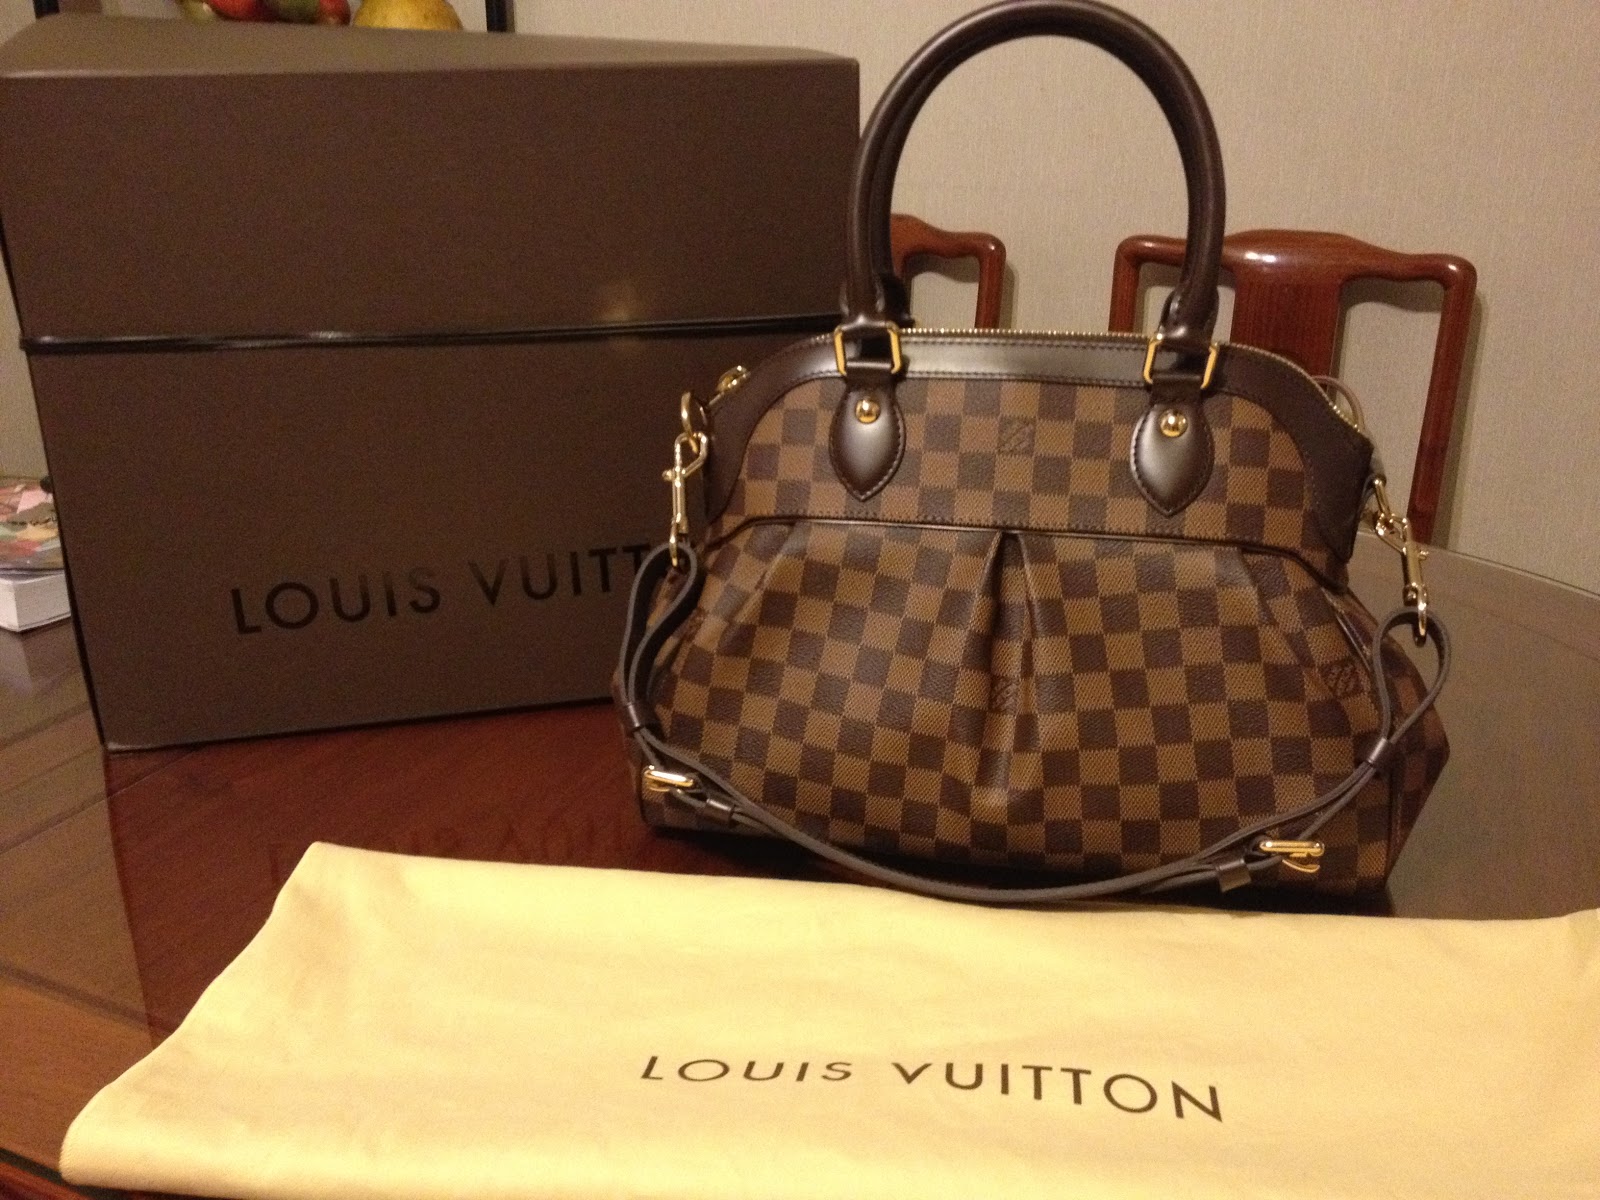 all things fashion, handbags, literacybasics.ca me : Louis Vuitton Trevi PM; my review on this ...